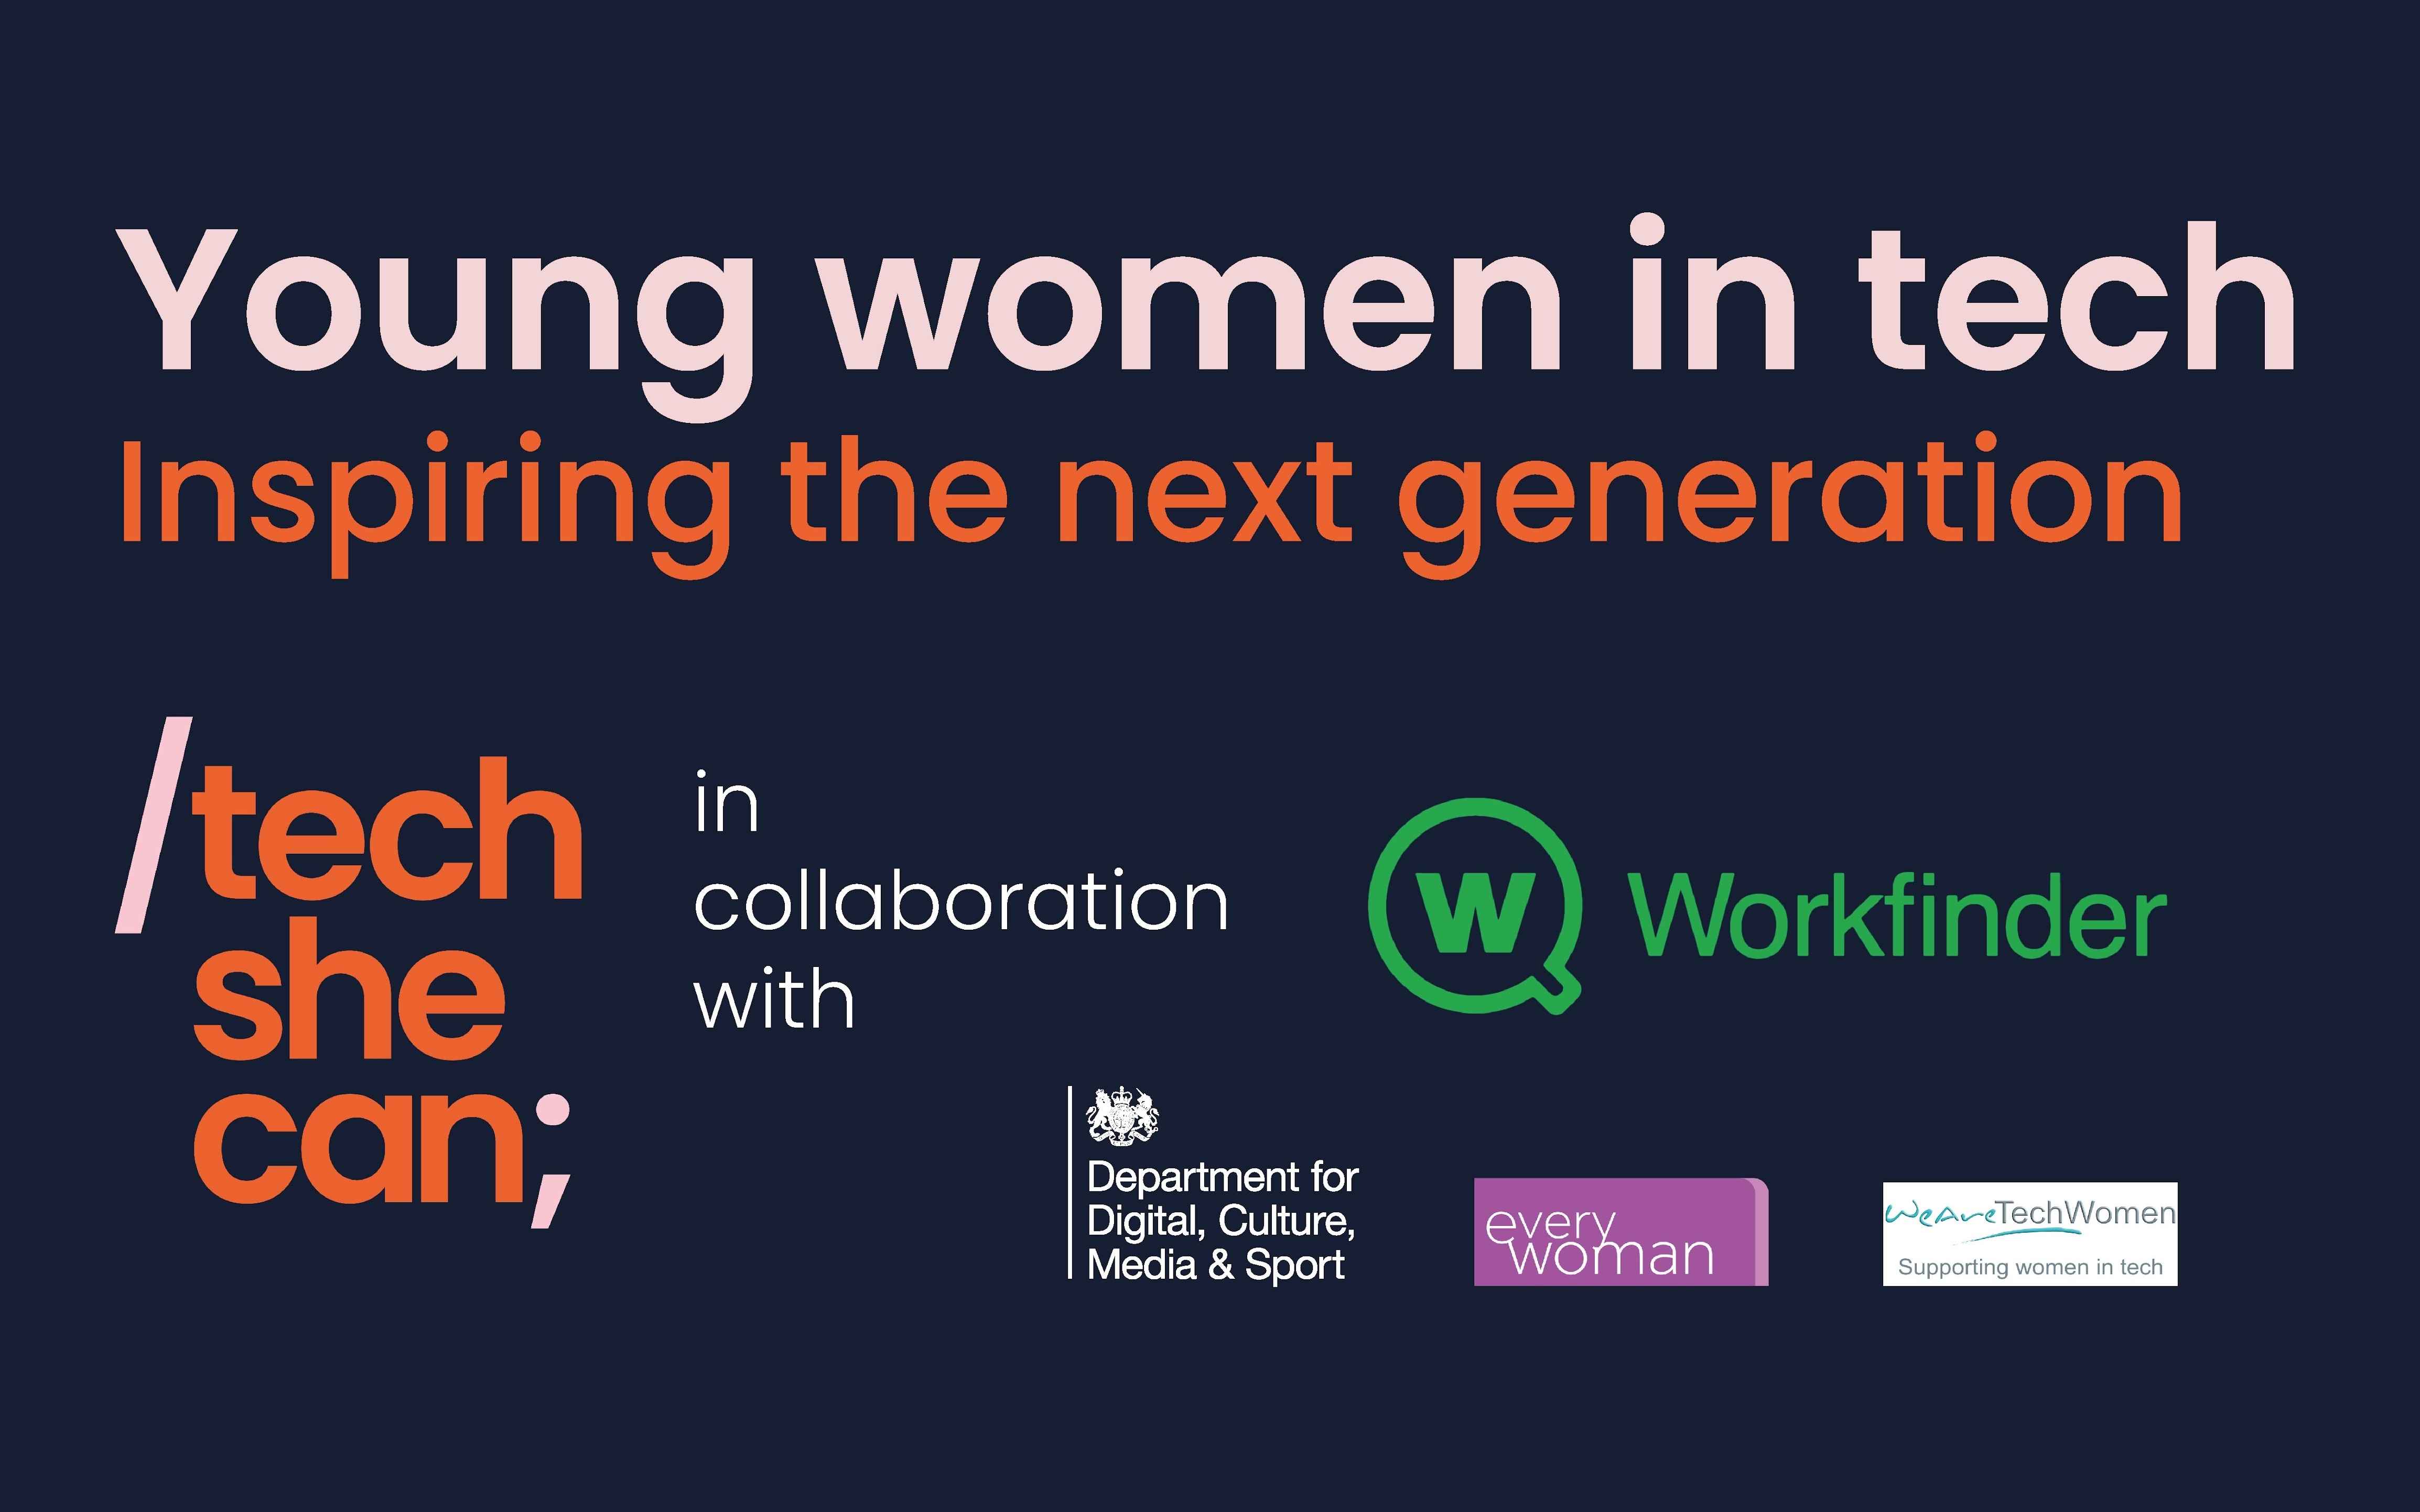 Are you a young woman working in tech? We want to hear from you!